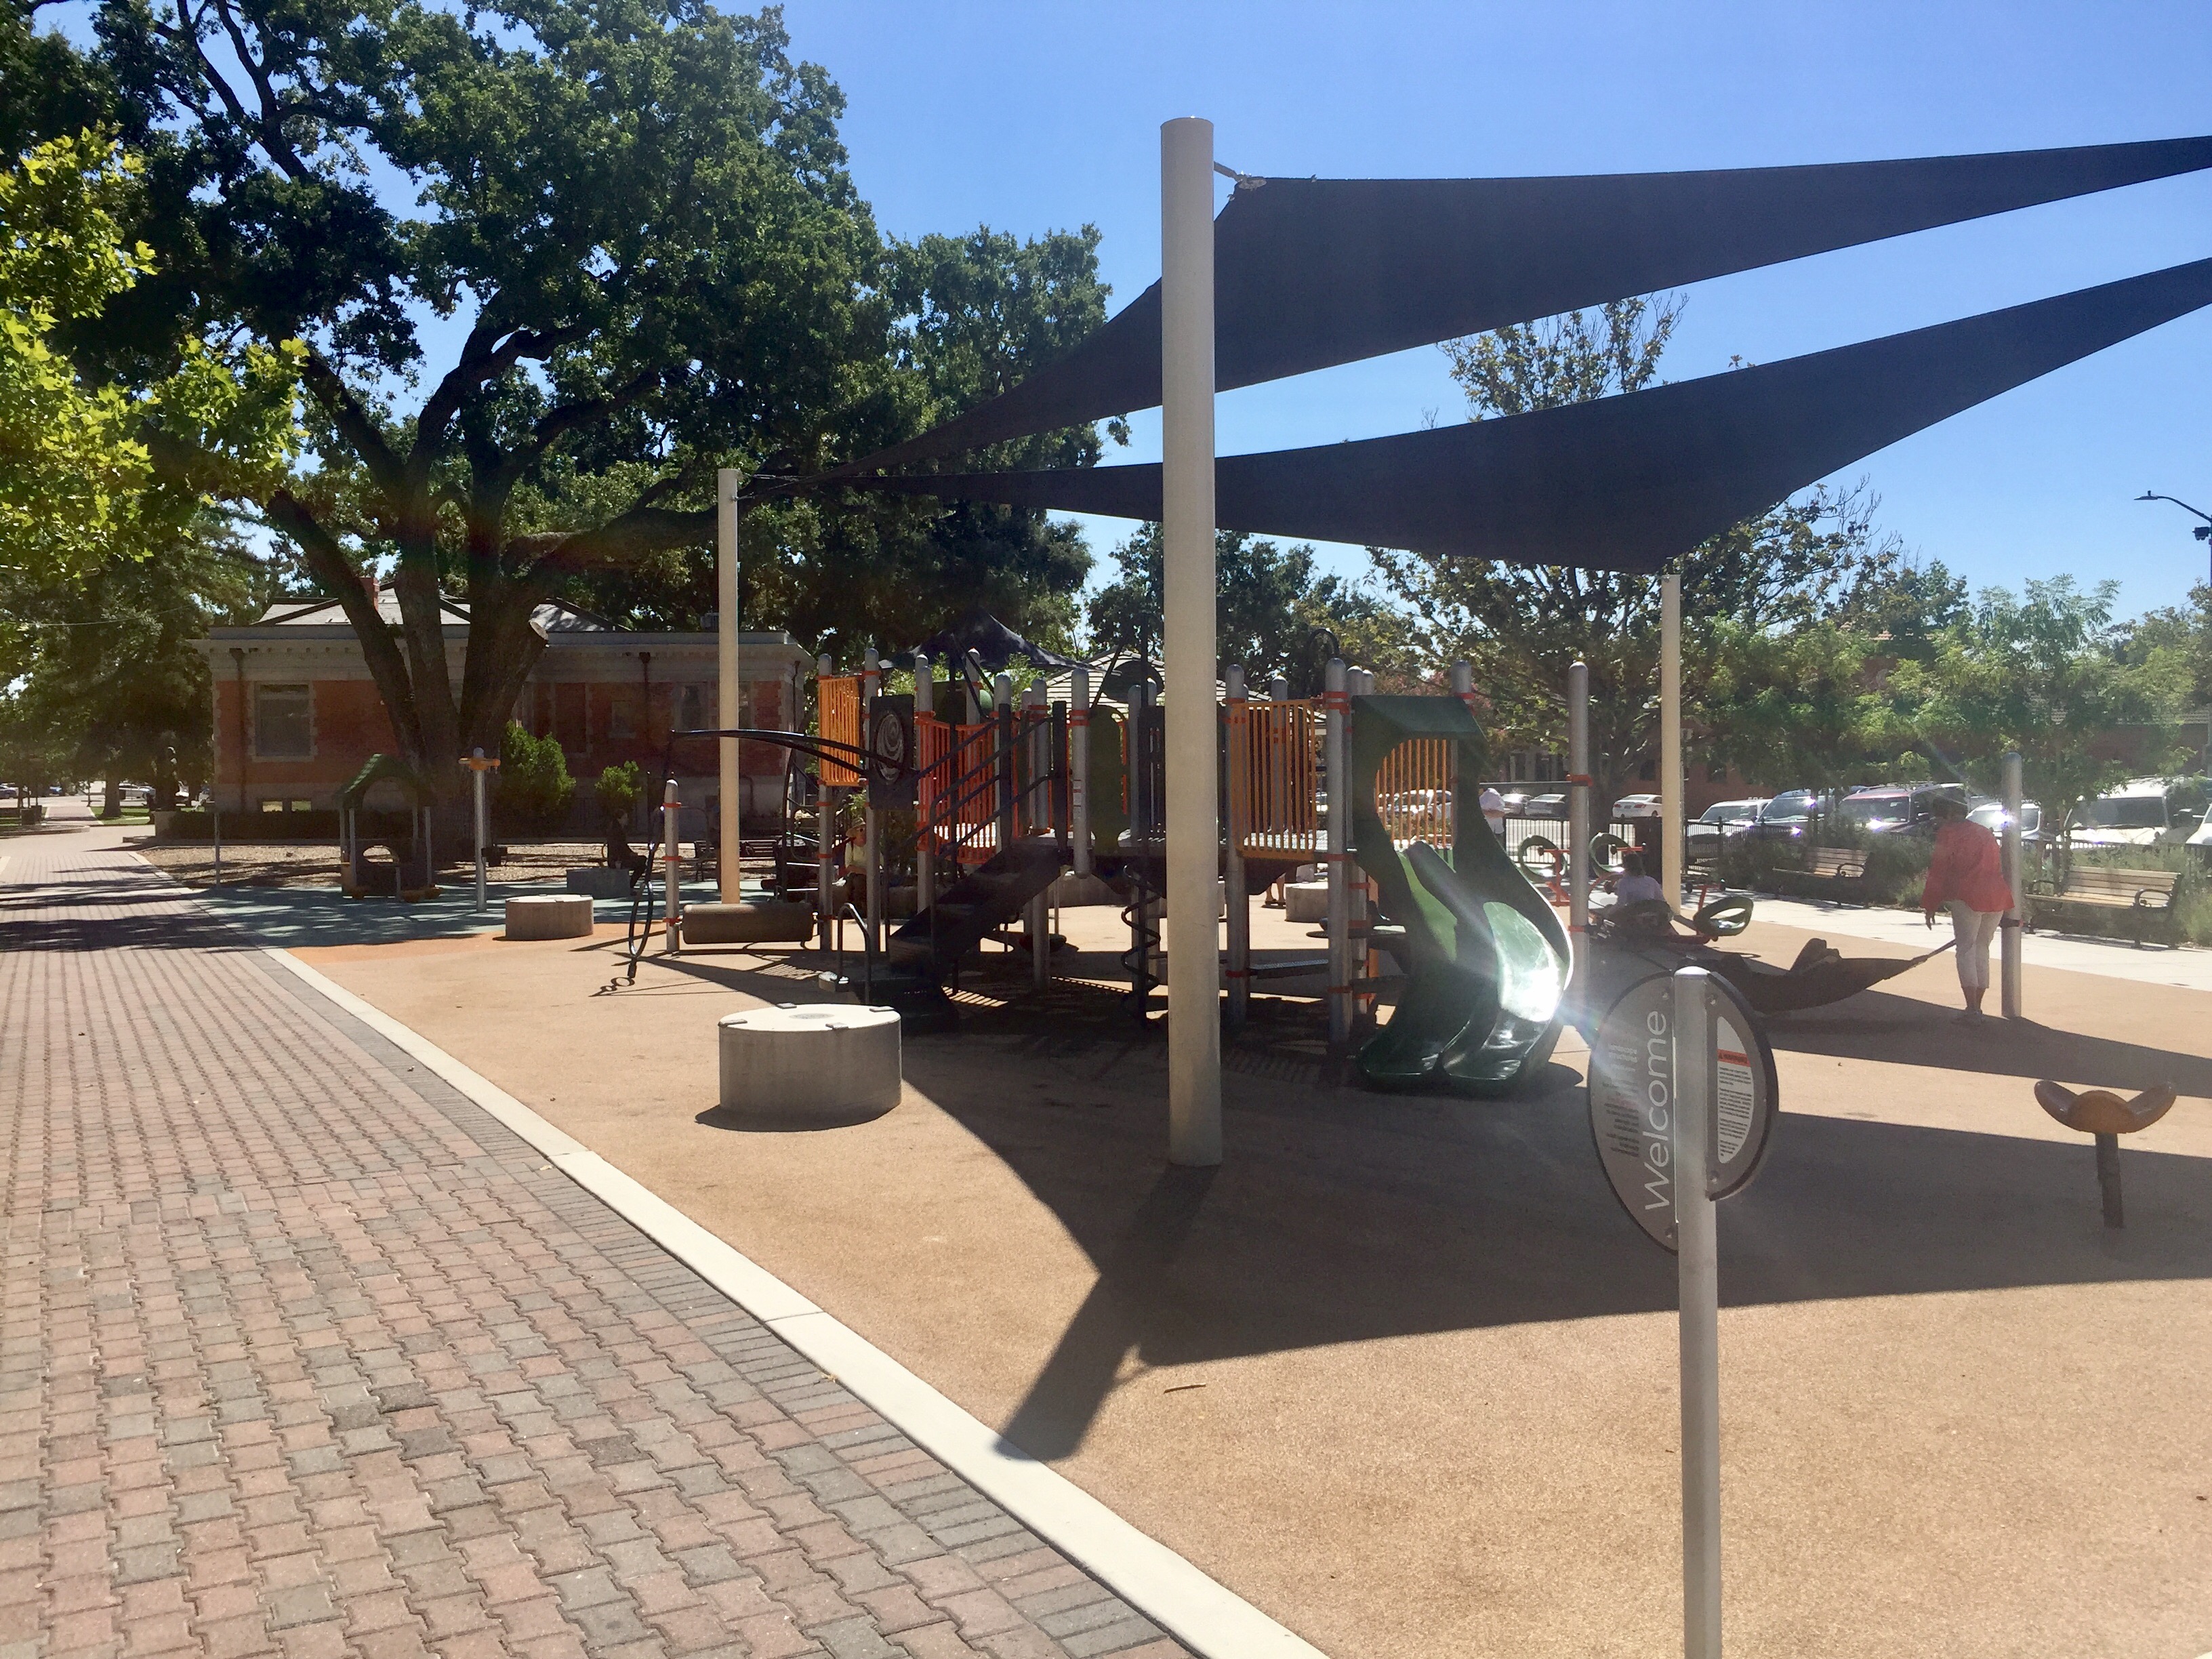 City Park playground in Downtown Paso Robles California